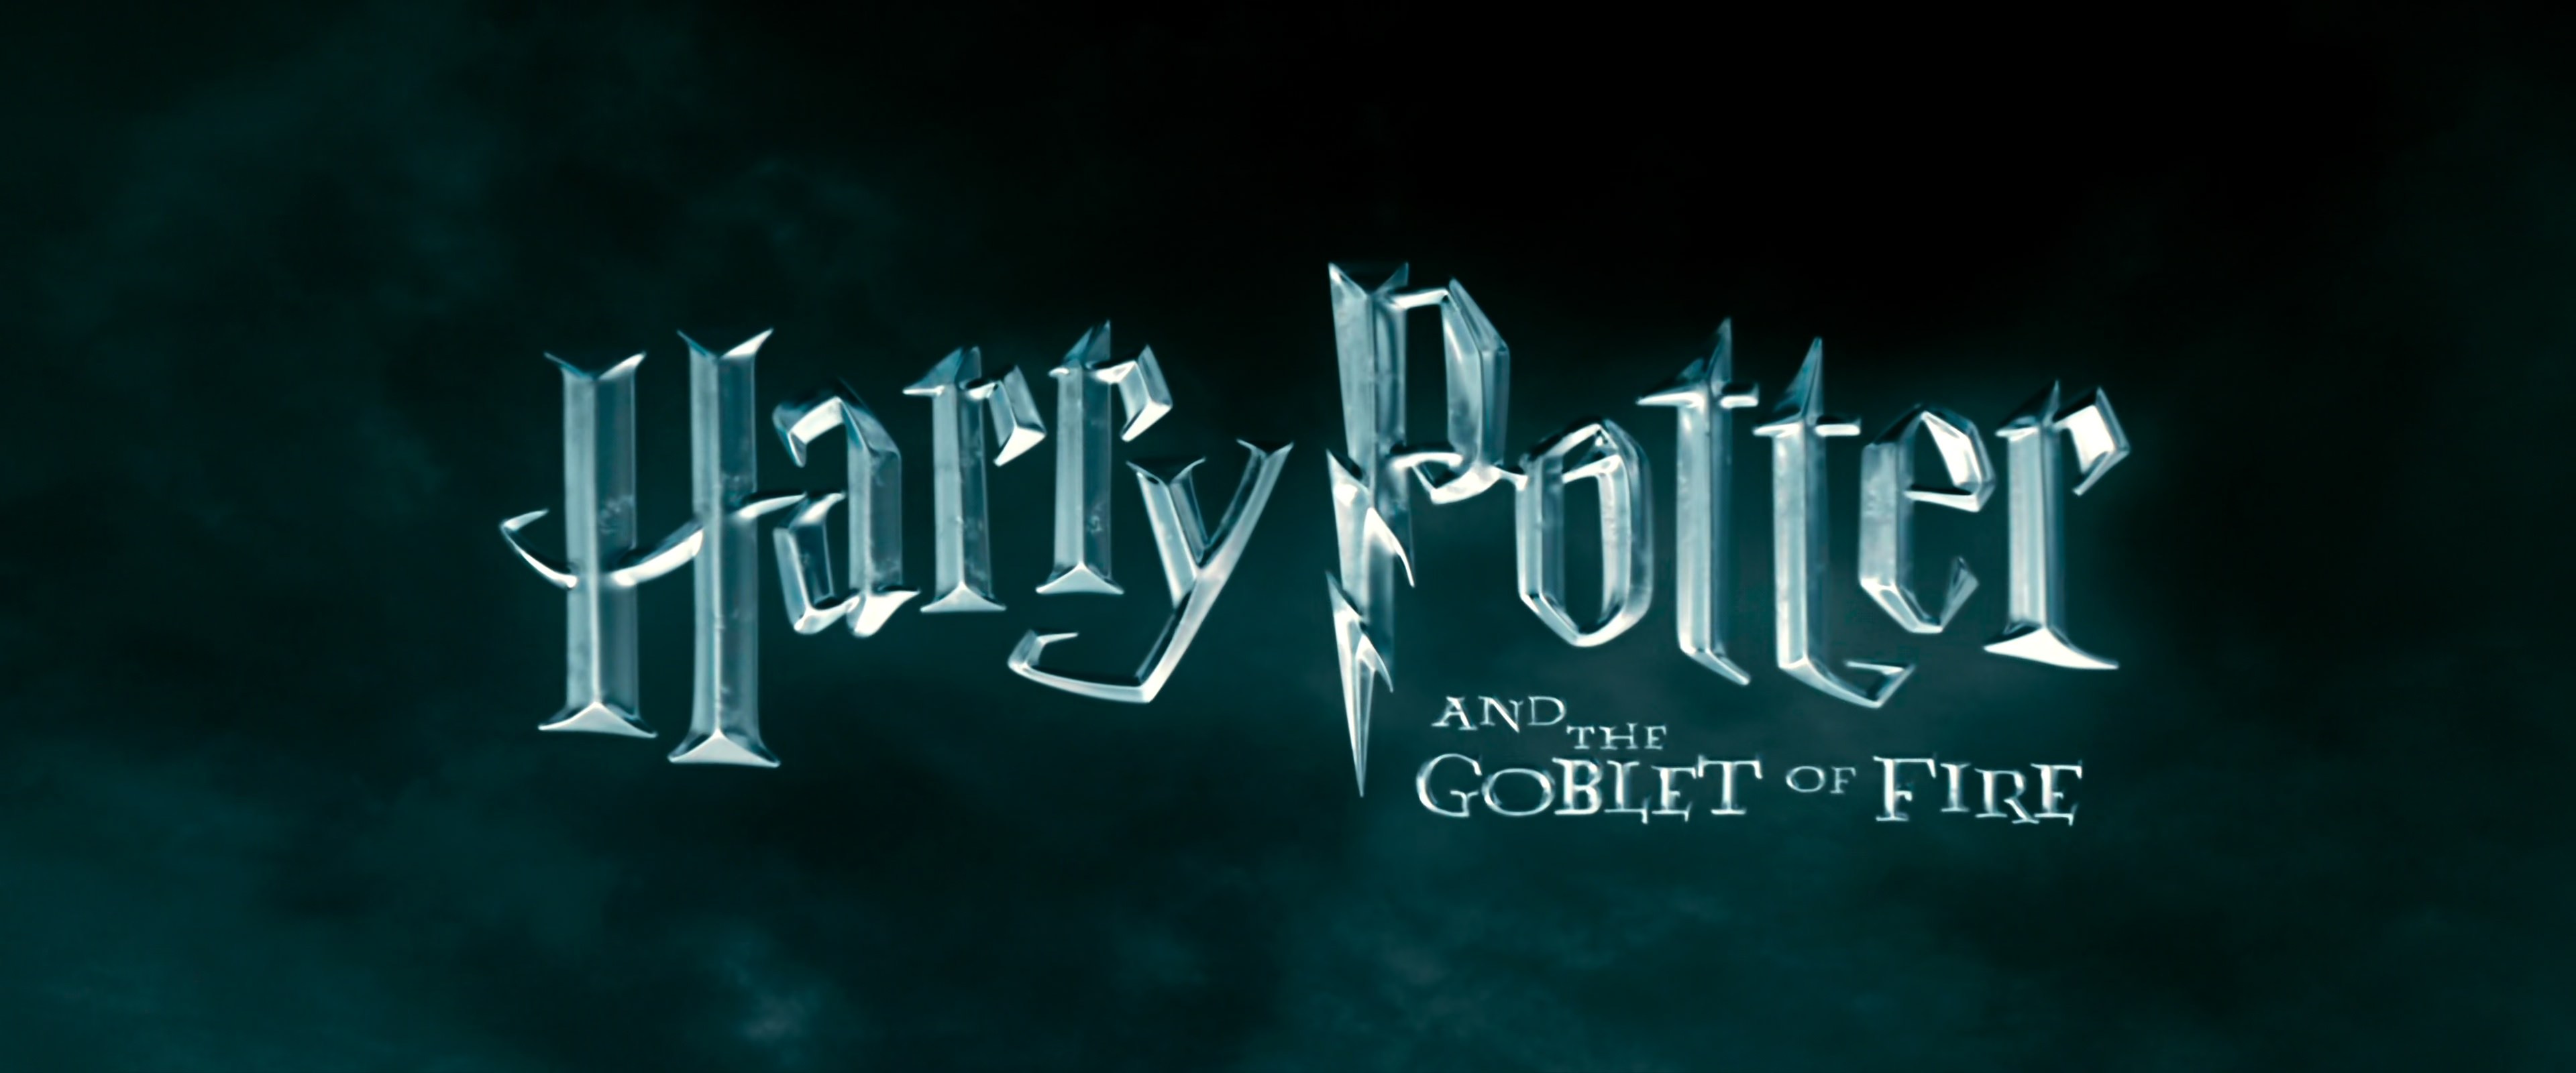 free downloads Harry Potter and the Goblet of Fire